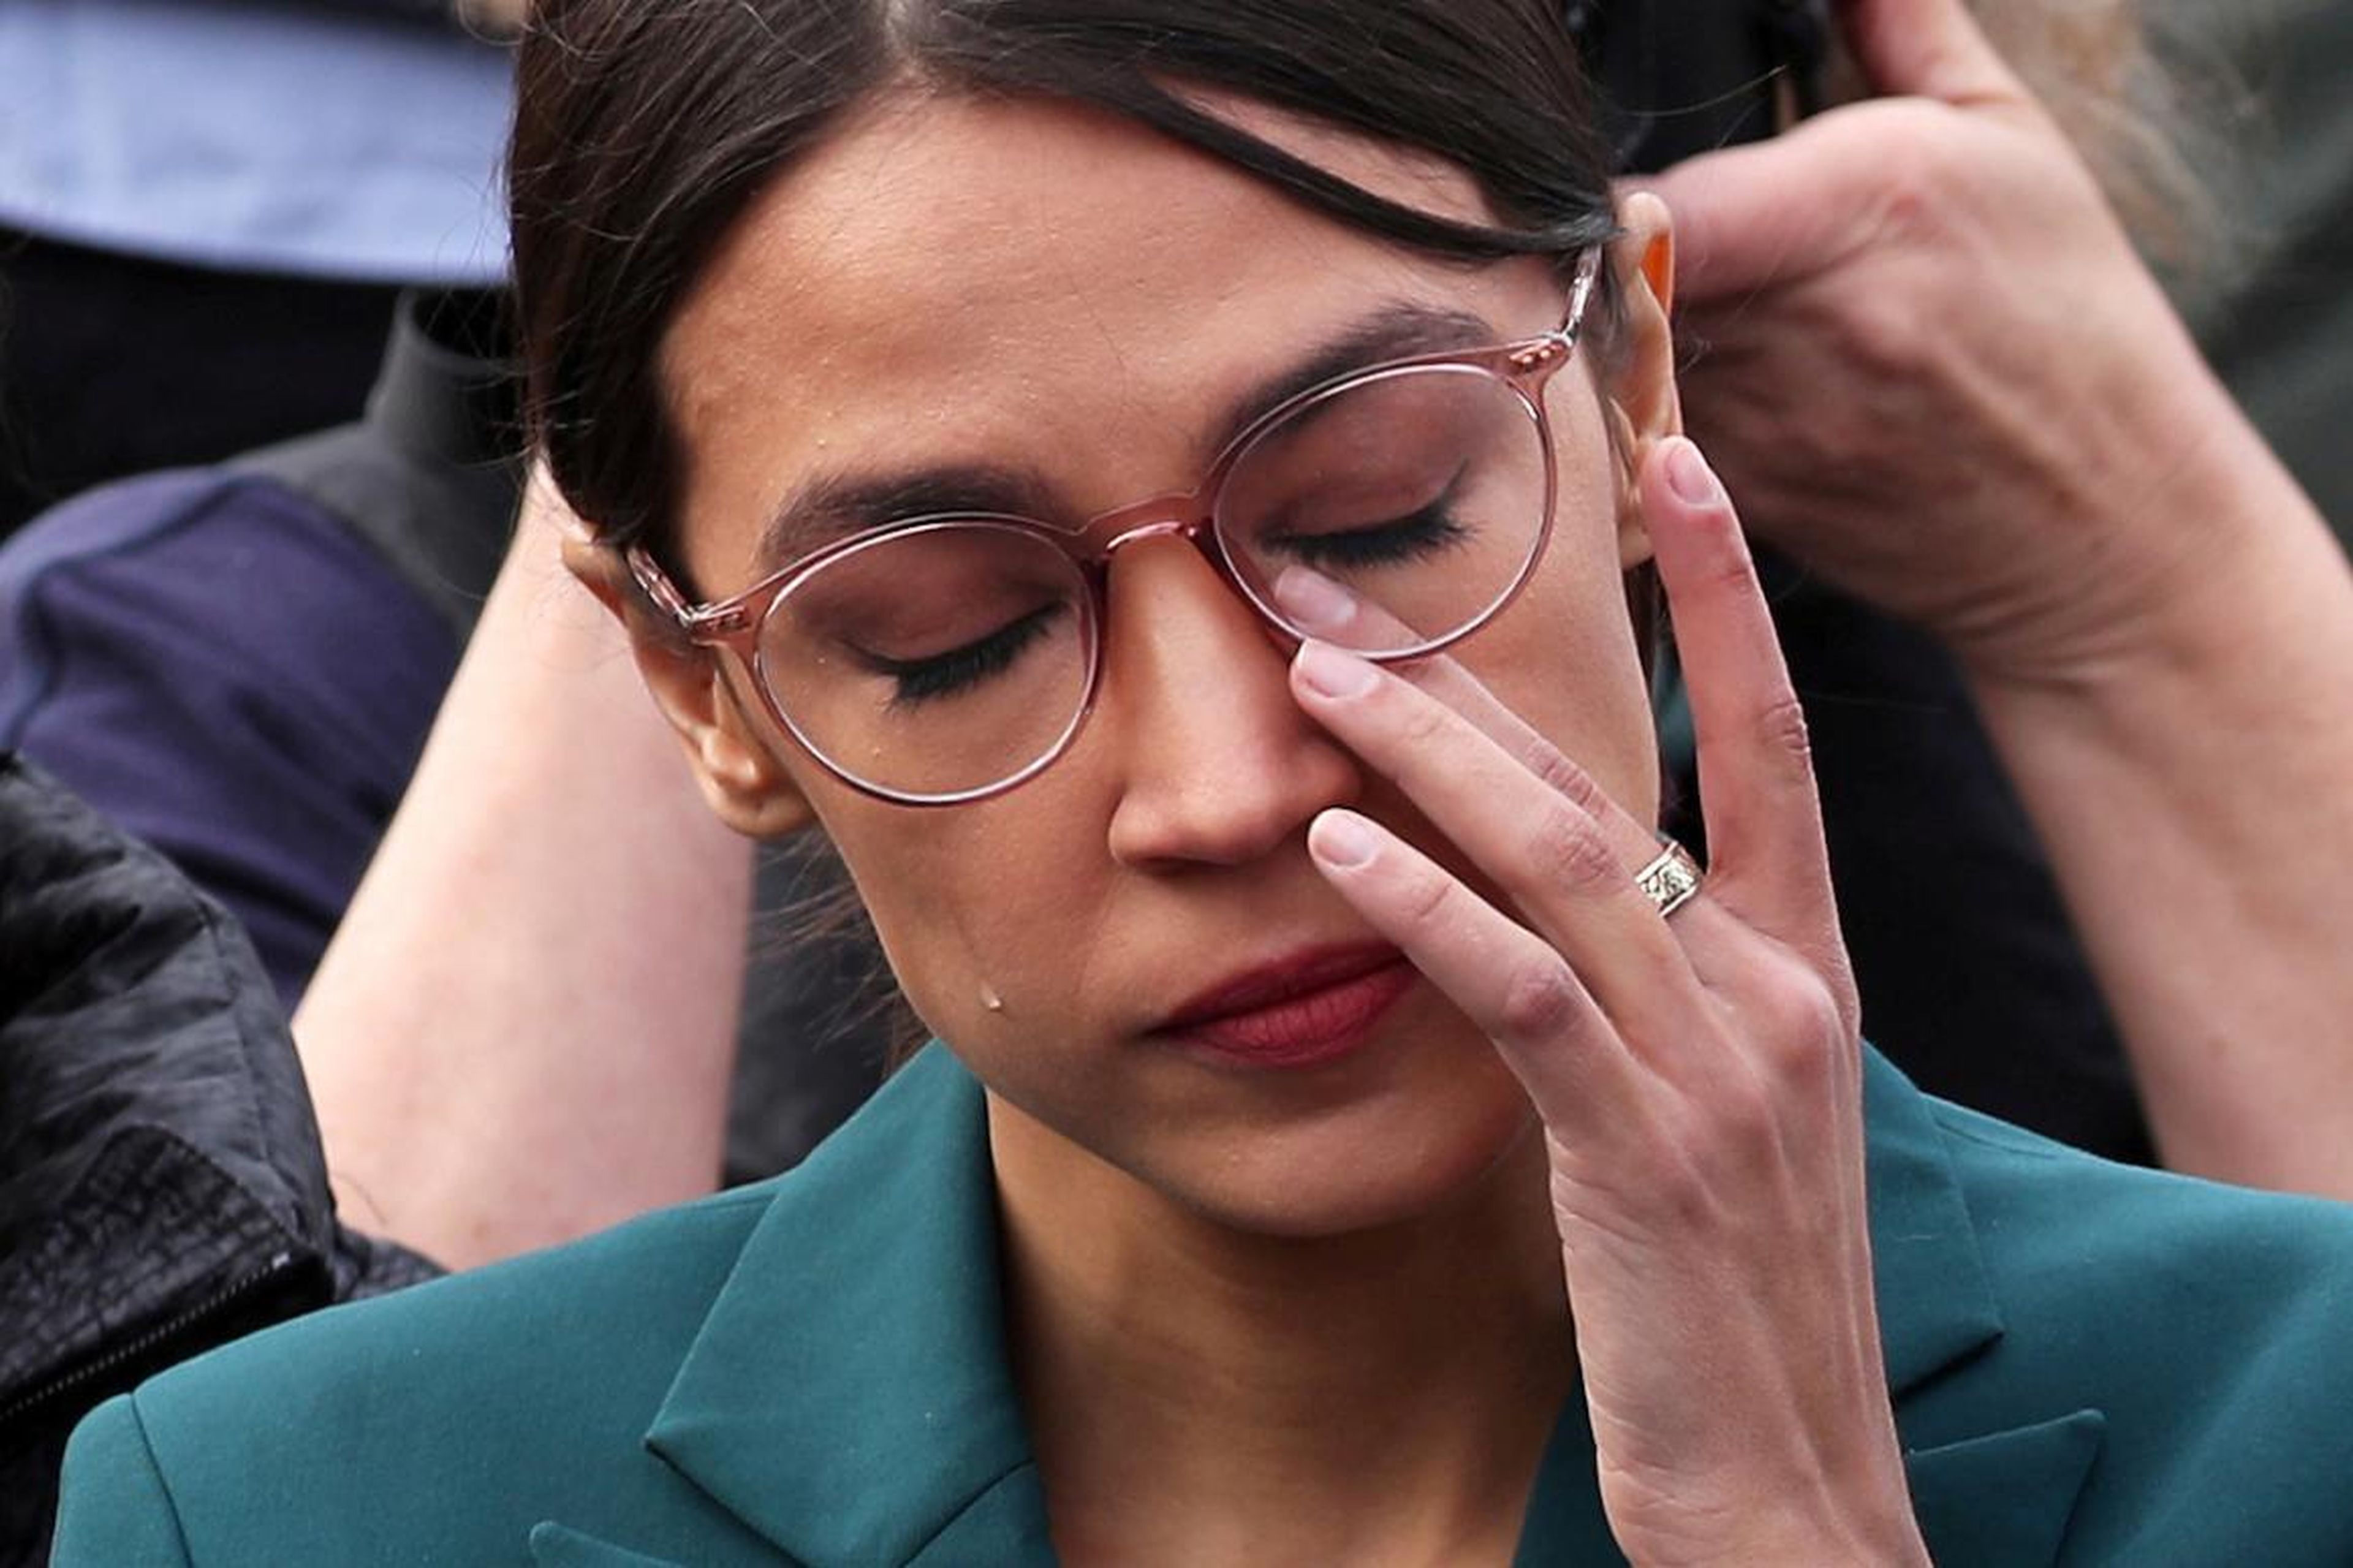 U.S. Representative Alexandria Ocasio-Cortez wipes away tears as Representative Ilhan Omar talks about her own experience as a refugee during a news conference calling on Congress to cut funding for ICE (Immigration and Customs